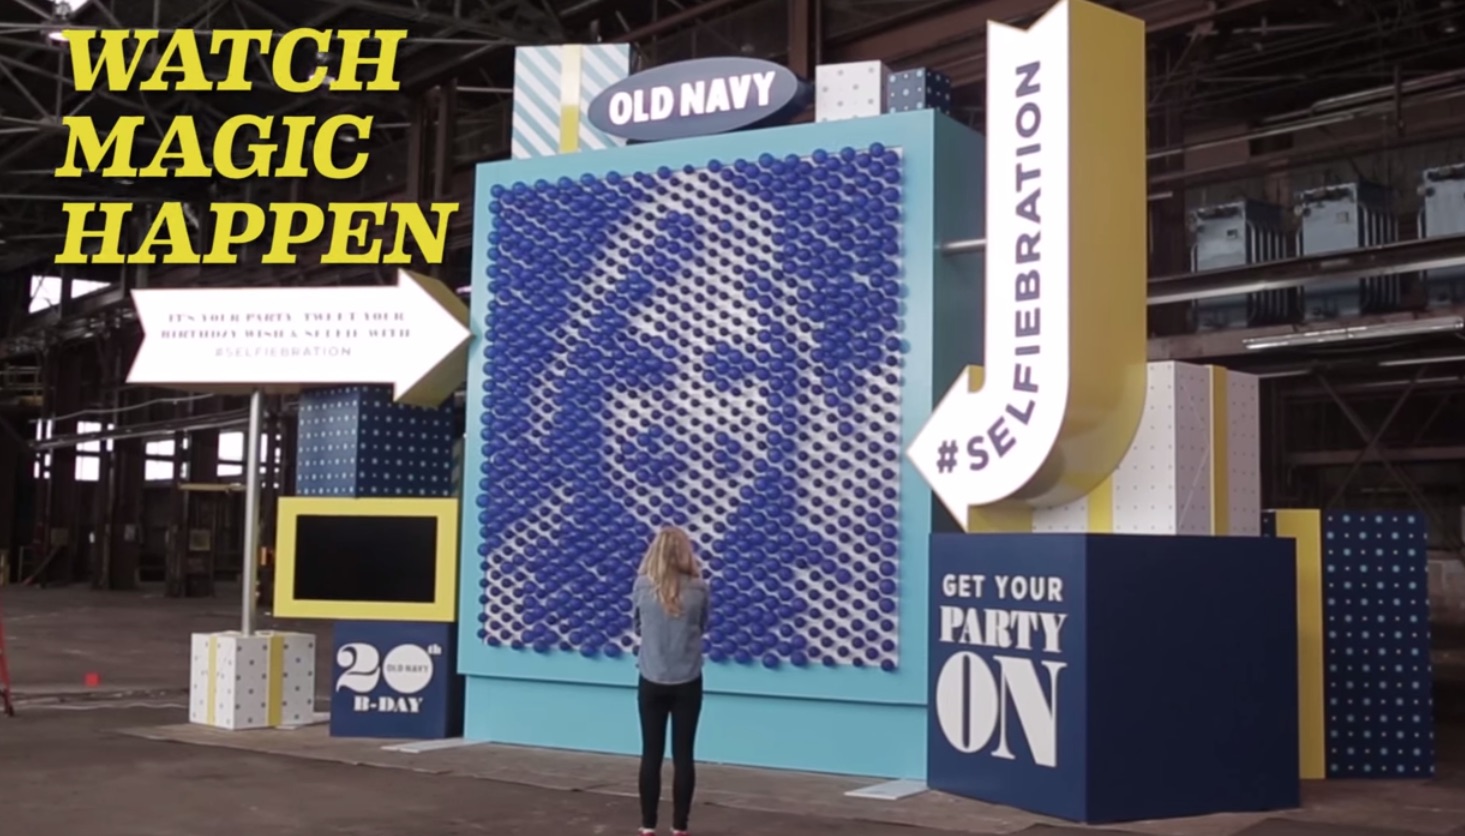 Old Navy Celebrating Birthday By Rendering Selfies In Balloons For Some Reason